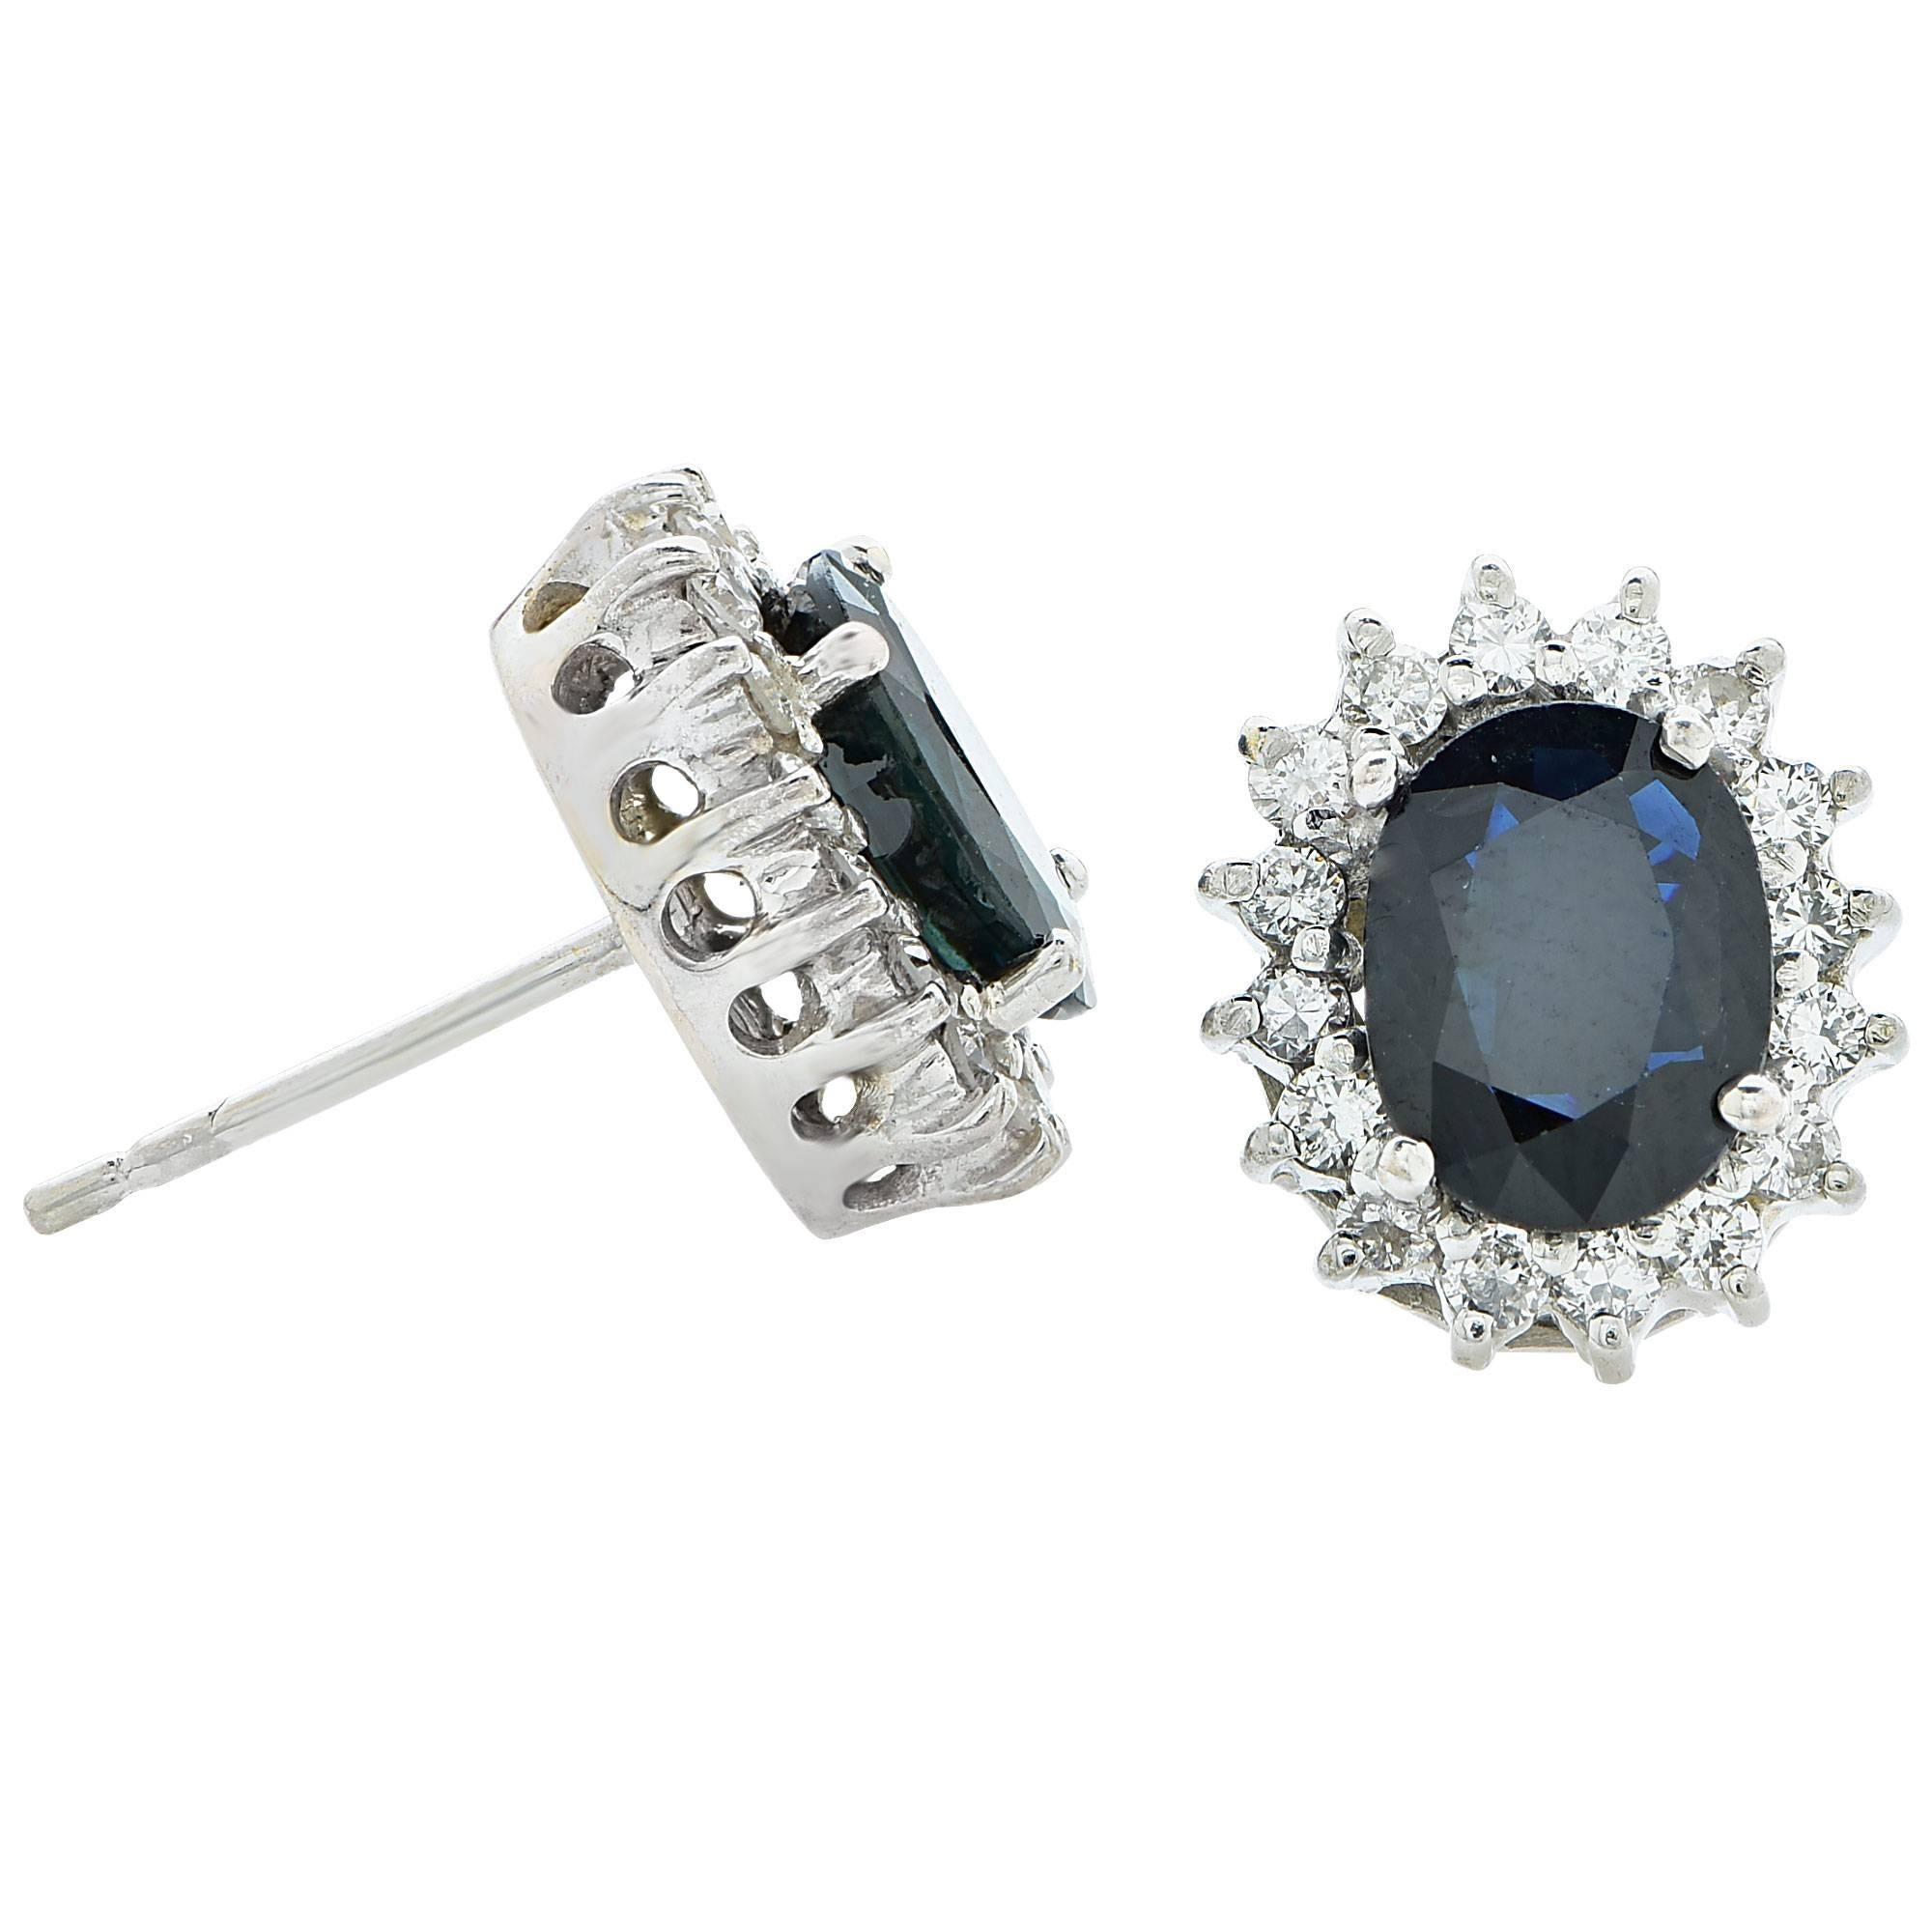 18k white gold earrings featuring 2 oval cut sapphires weighing approximately 3cts total accented by 32 round brilliant cut diamonds weighing approximately .80cts total, G color VS clarity.

It is stamped and tested as 18k gold.
The metal weight is